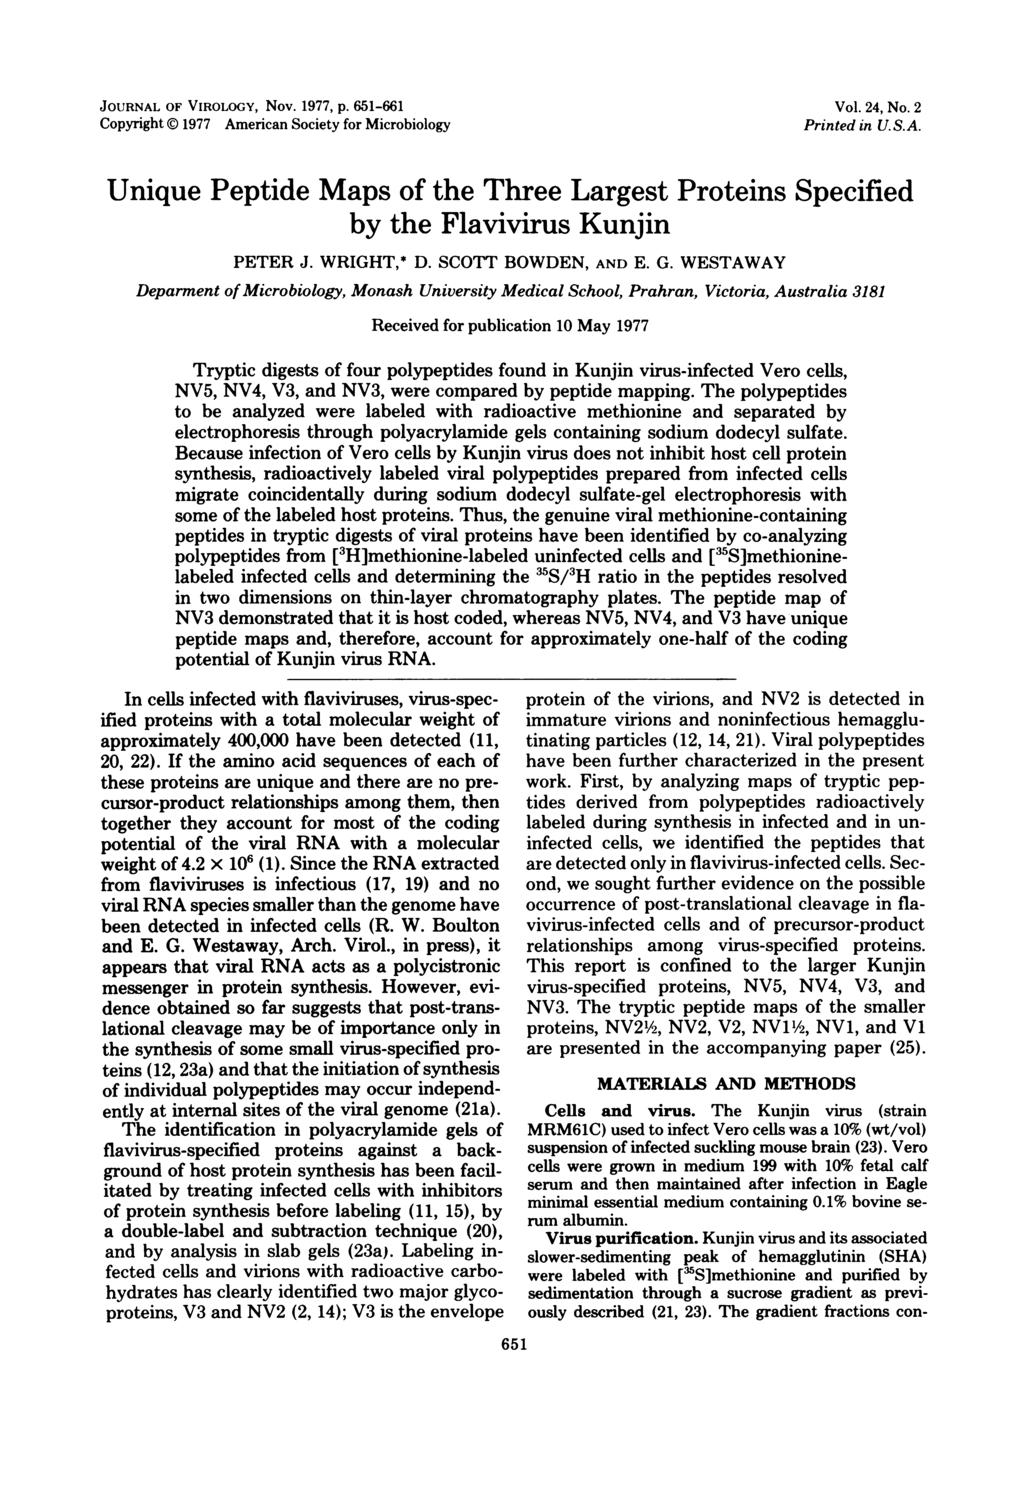 JOURNAL OF VIROLOGY, Nov. 1977, p. 651-661 Copyright 1977 American Society for Microbiology Vol. 24, No. 2 Printed in U.S.A. Unique Peptide Maps of the Three Largest Proteins Specified by the Flavivirus Kunjin PETER J.